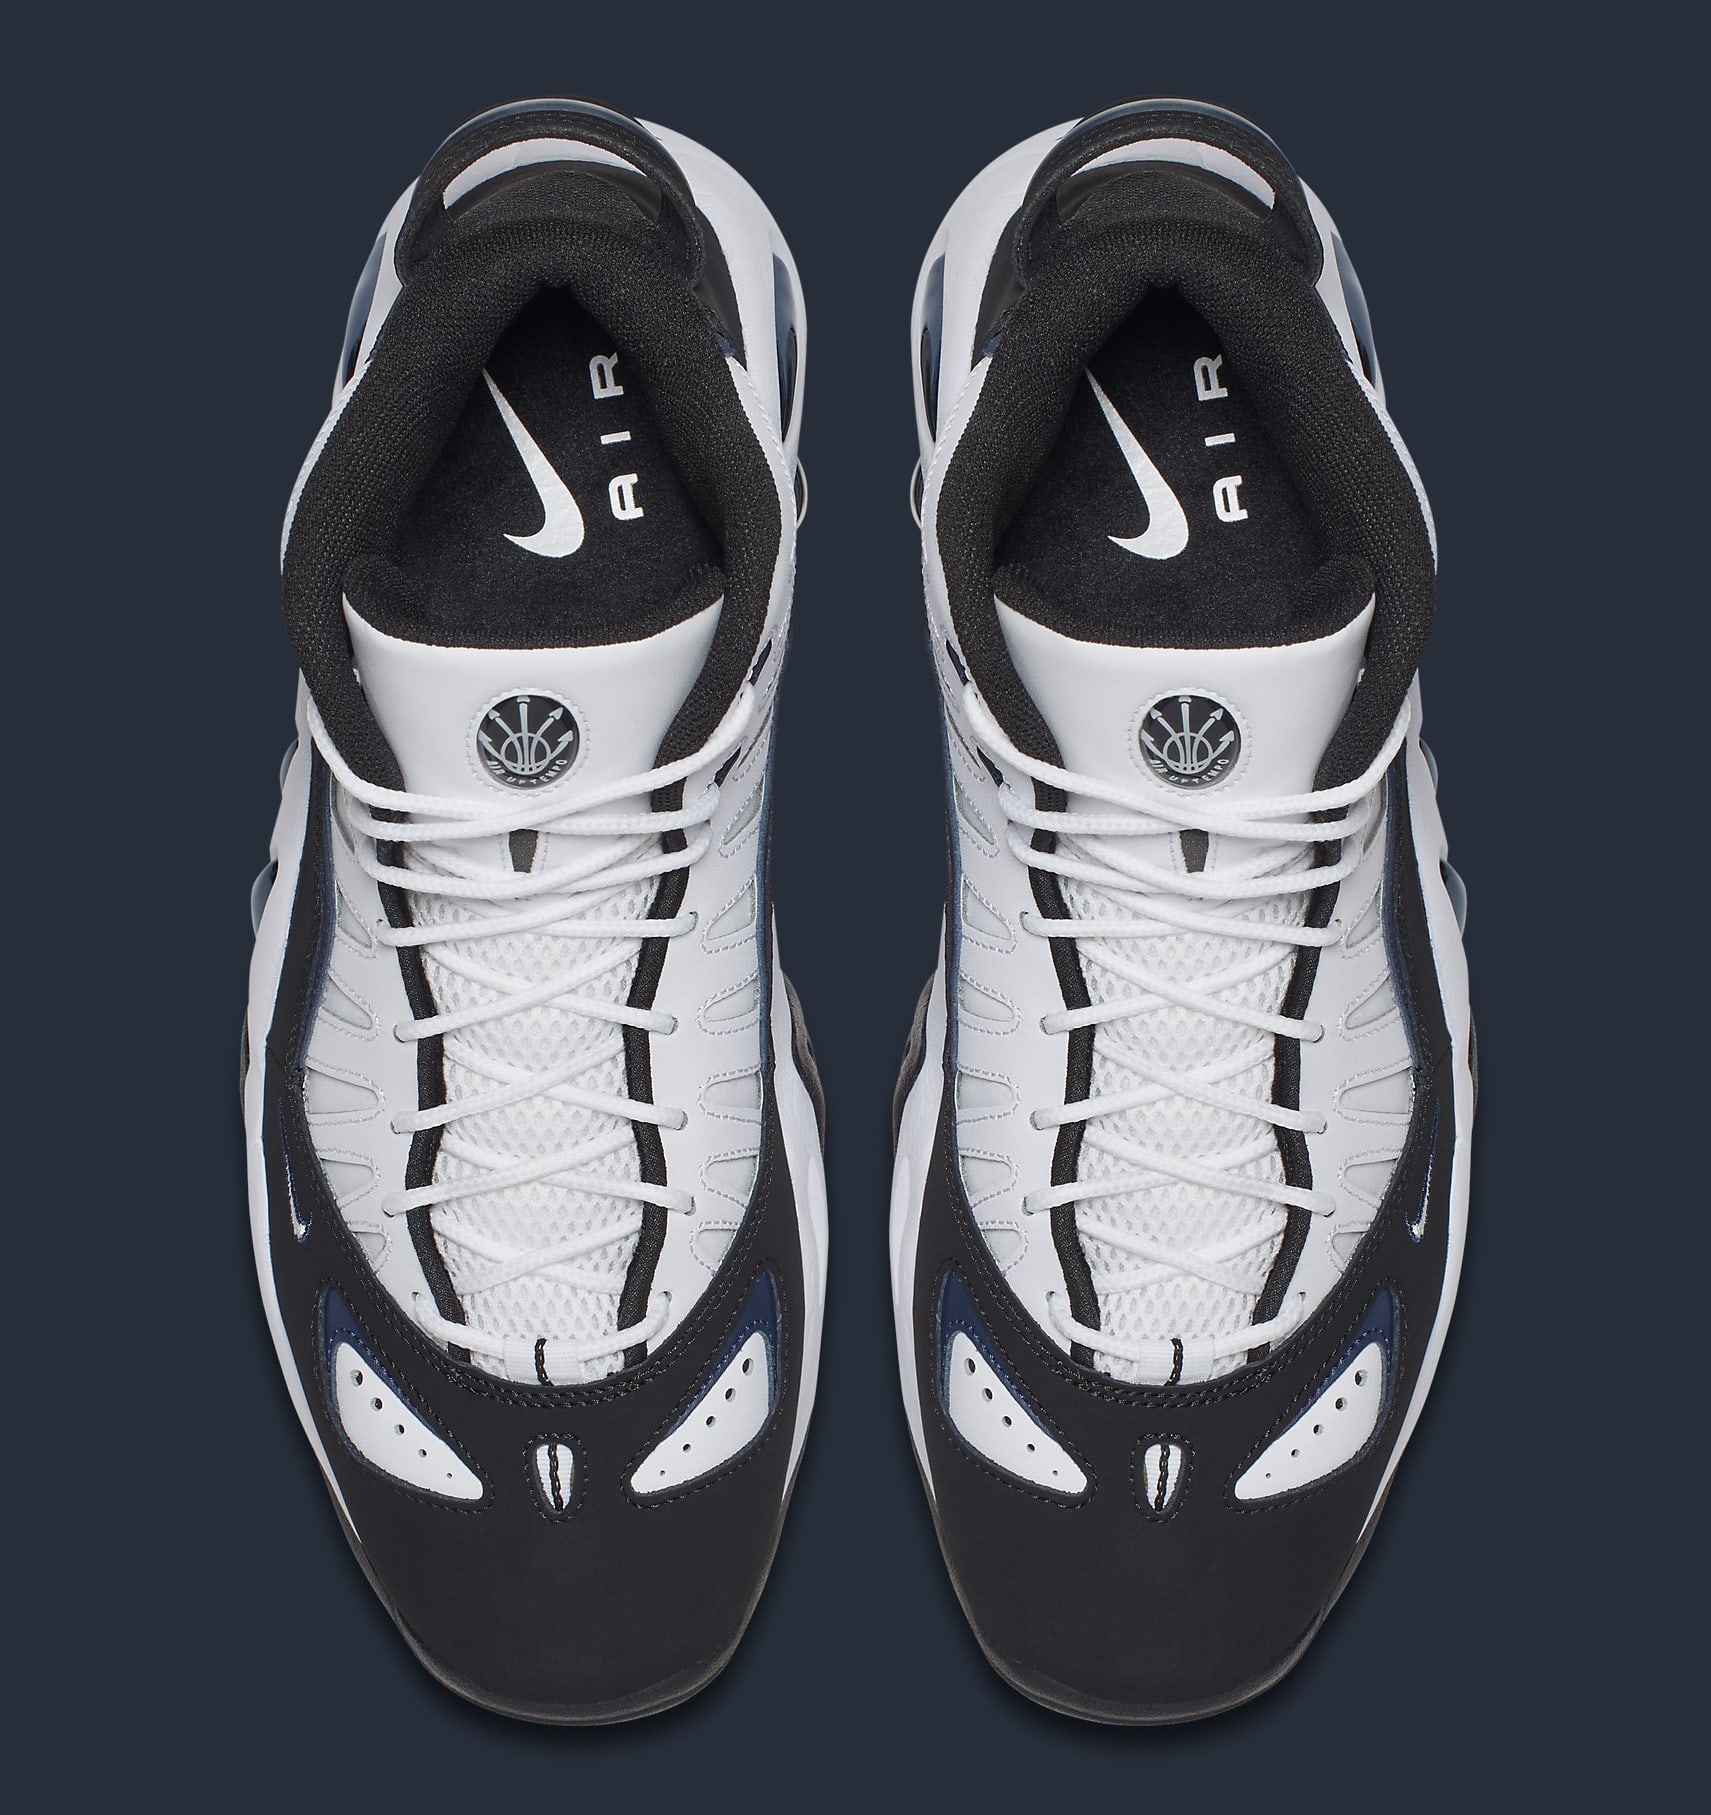 nike-air-max-uptempo-97-college-navy-399207-101-release-date-top